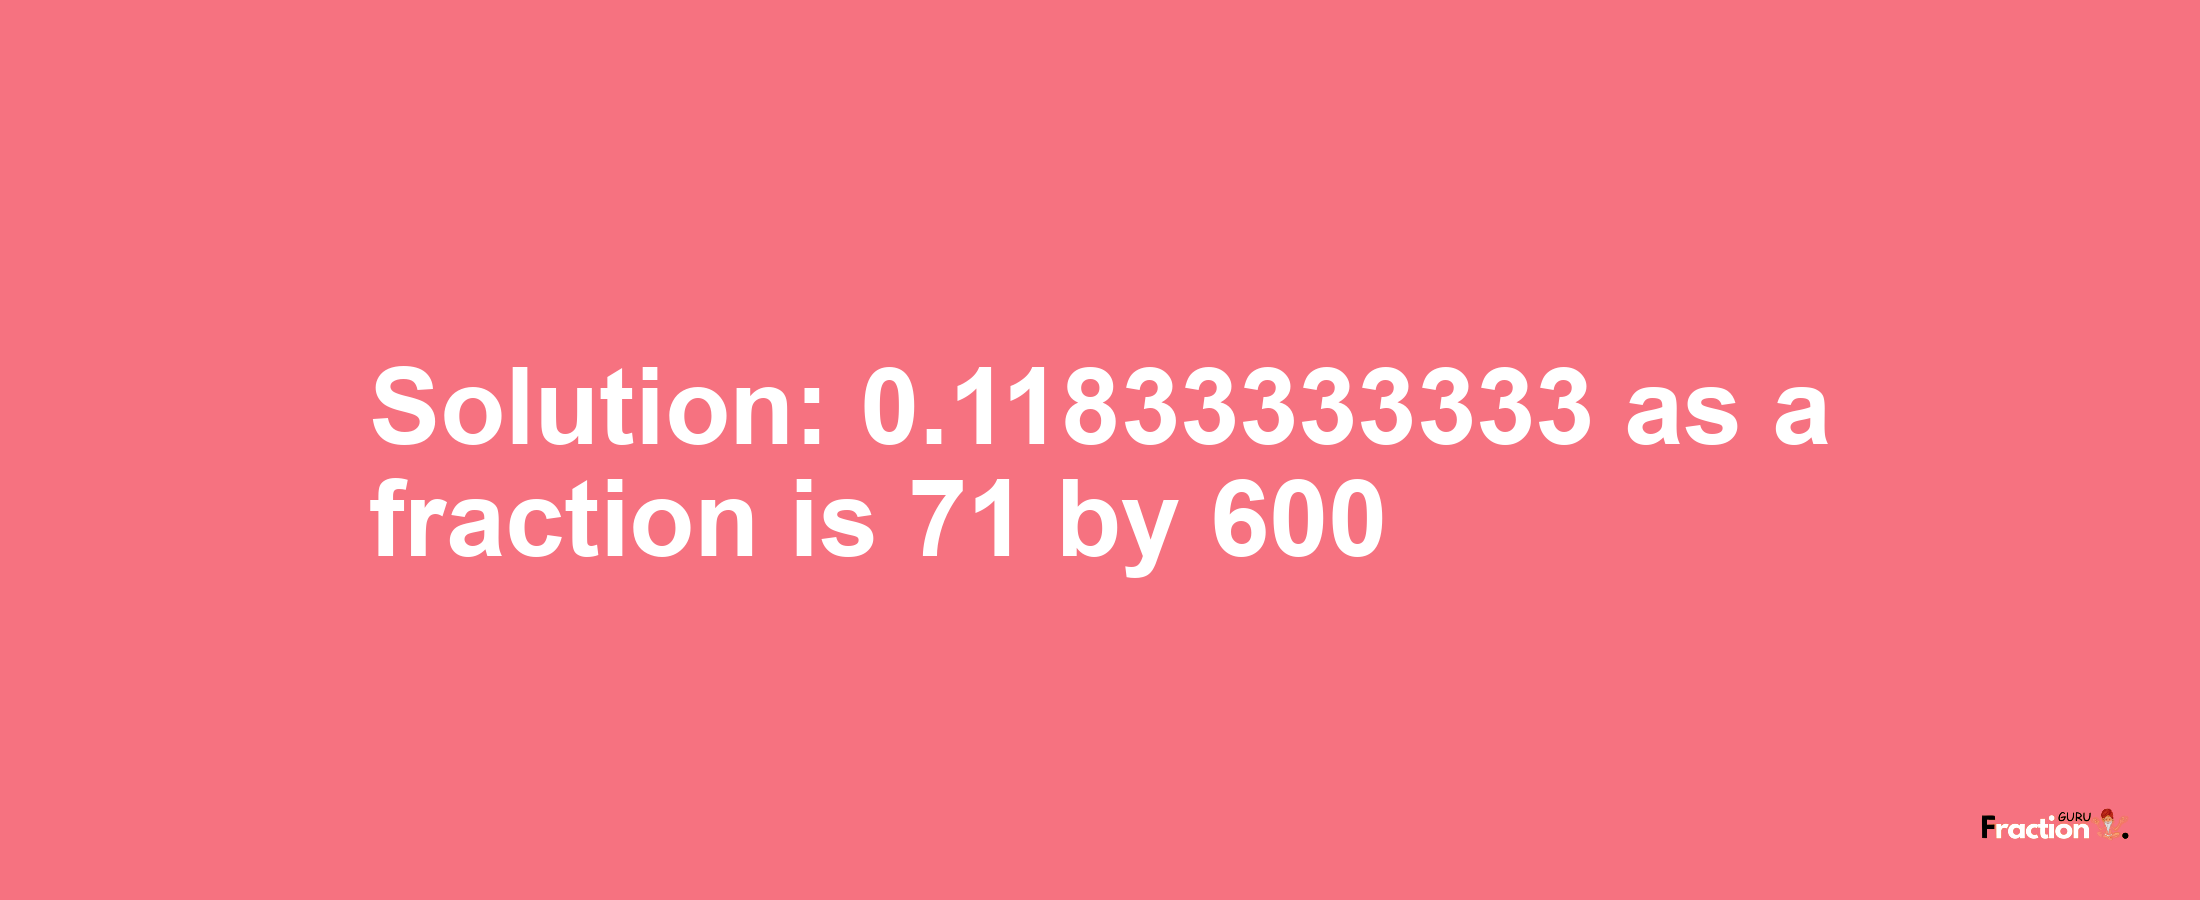 Solution:0.11833333333 as a fraction is 71/600